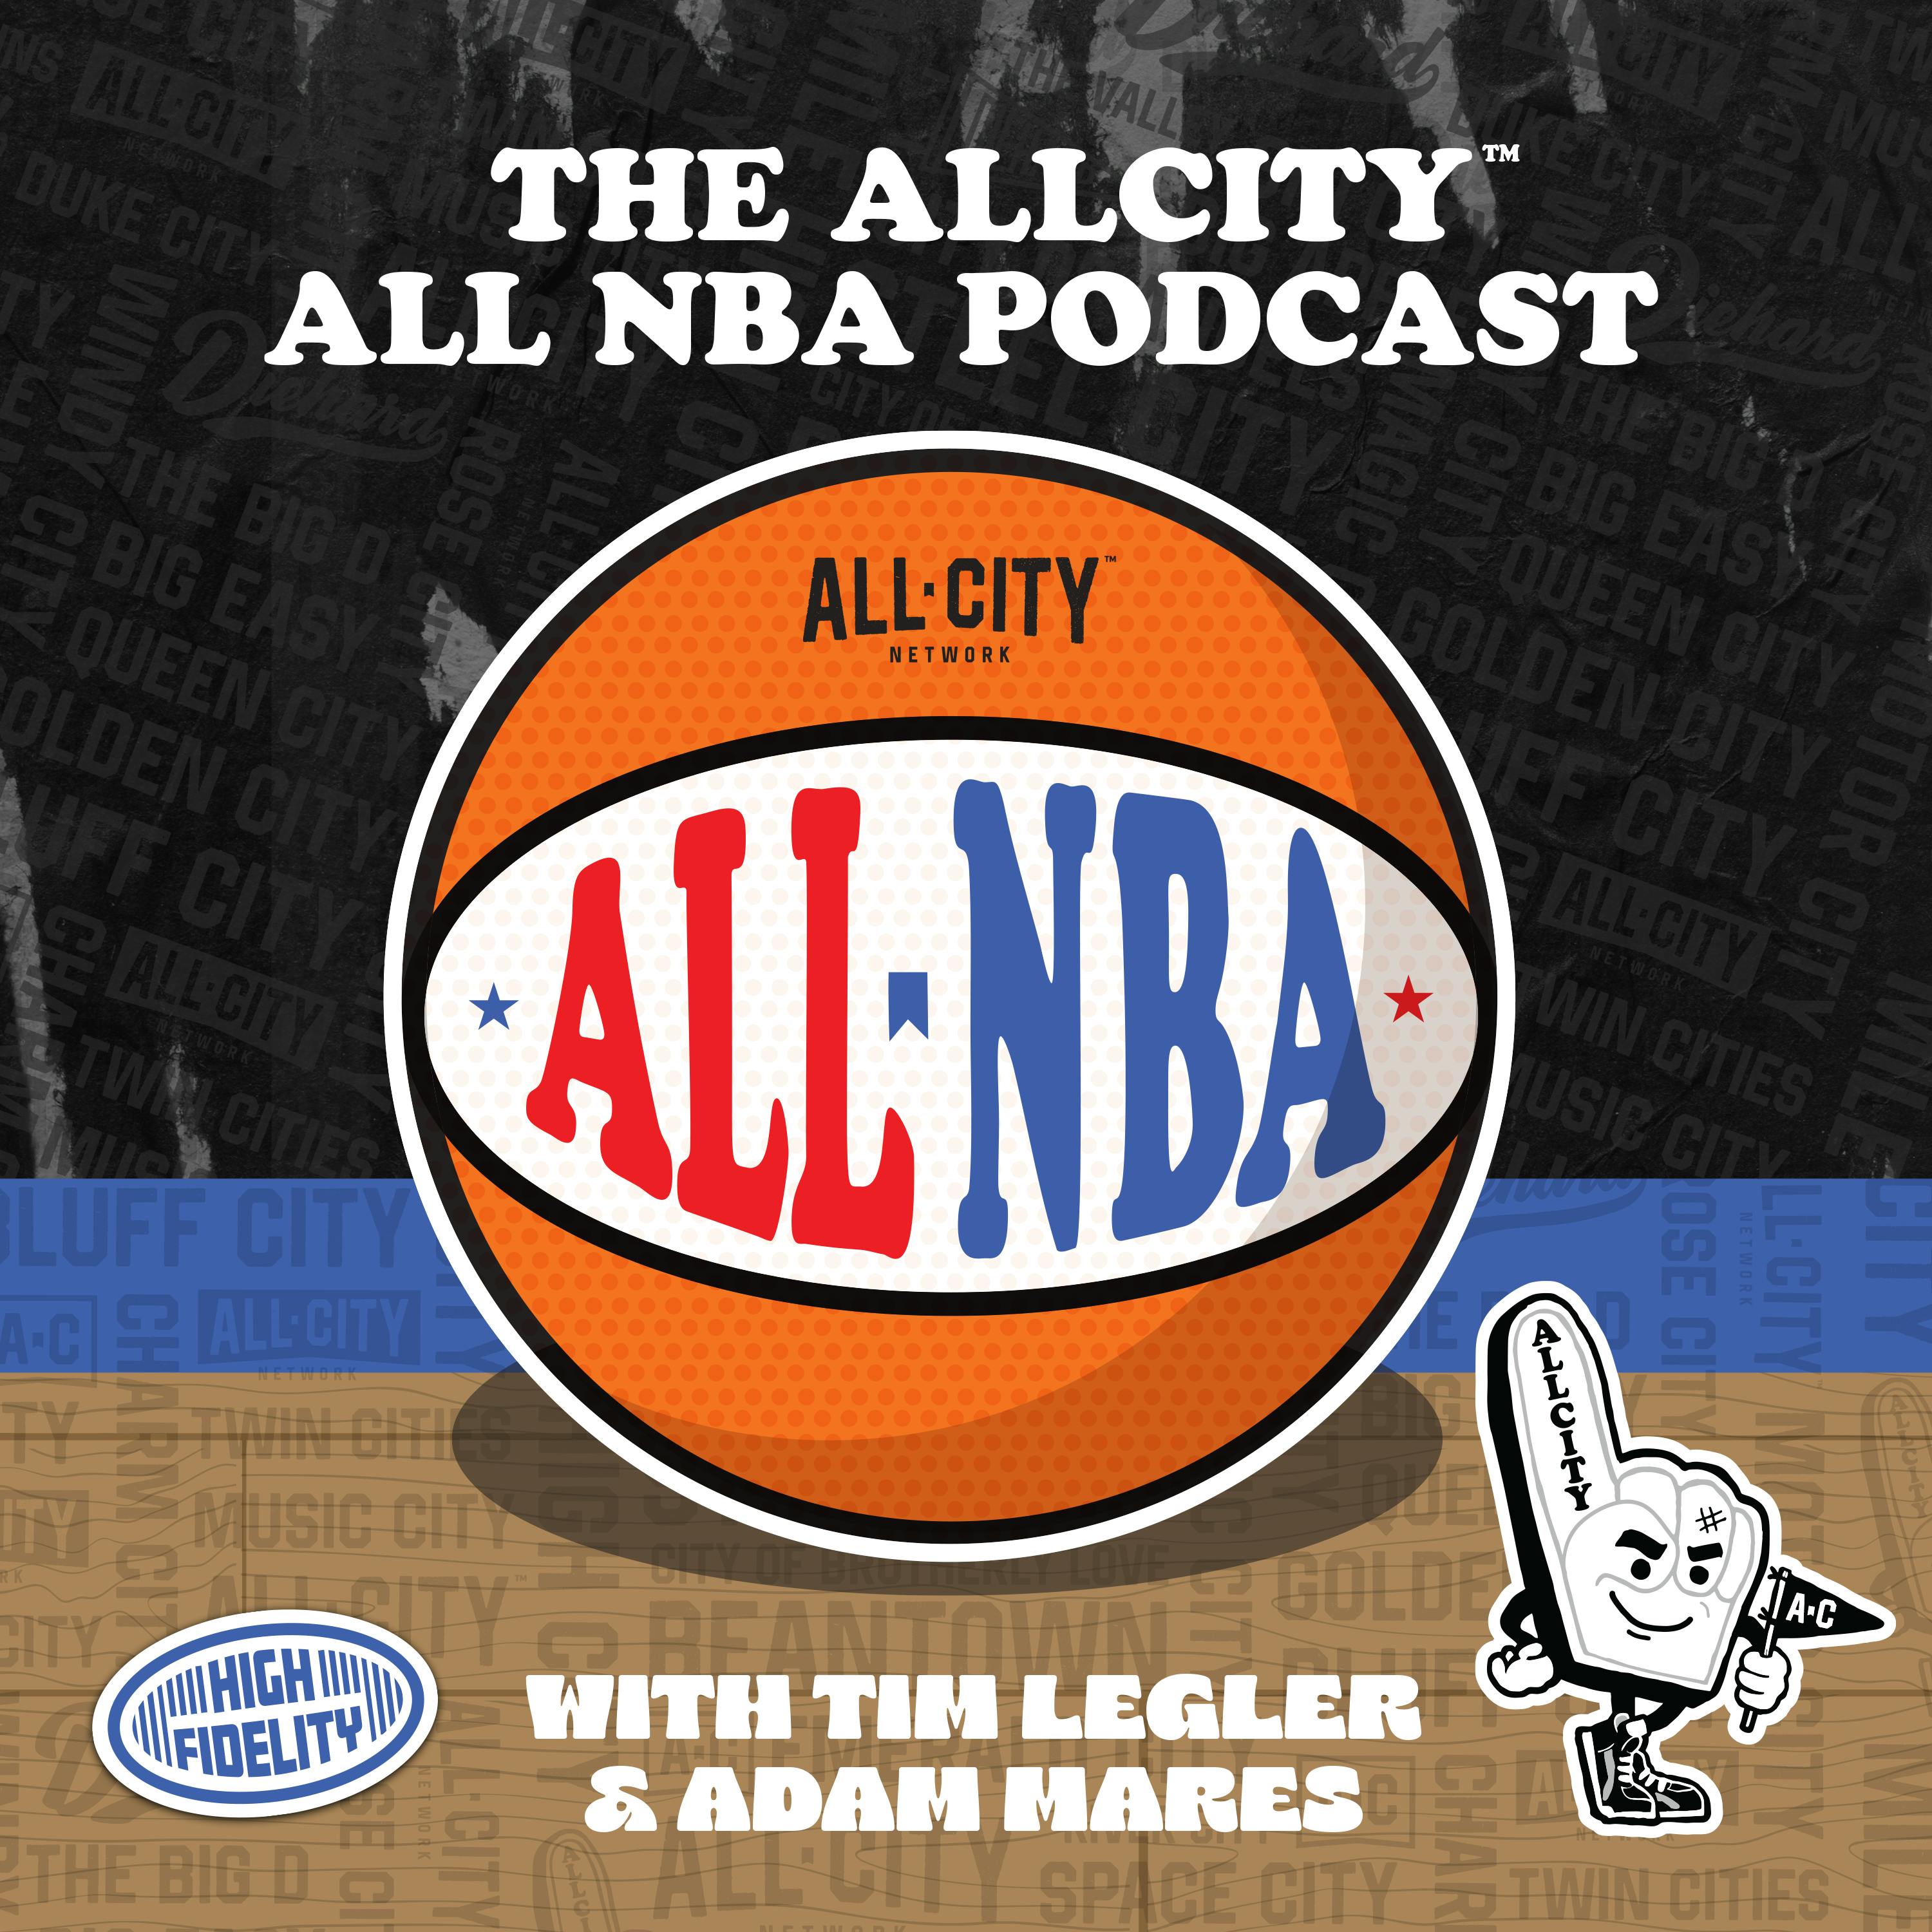 The ALL NBA Podcast: Which team is better setup for the future: Detroit Pistons or Portland Trail Blazers?